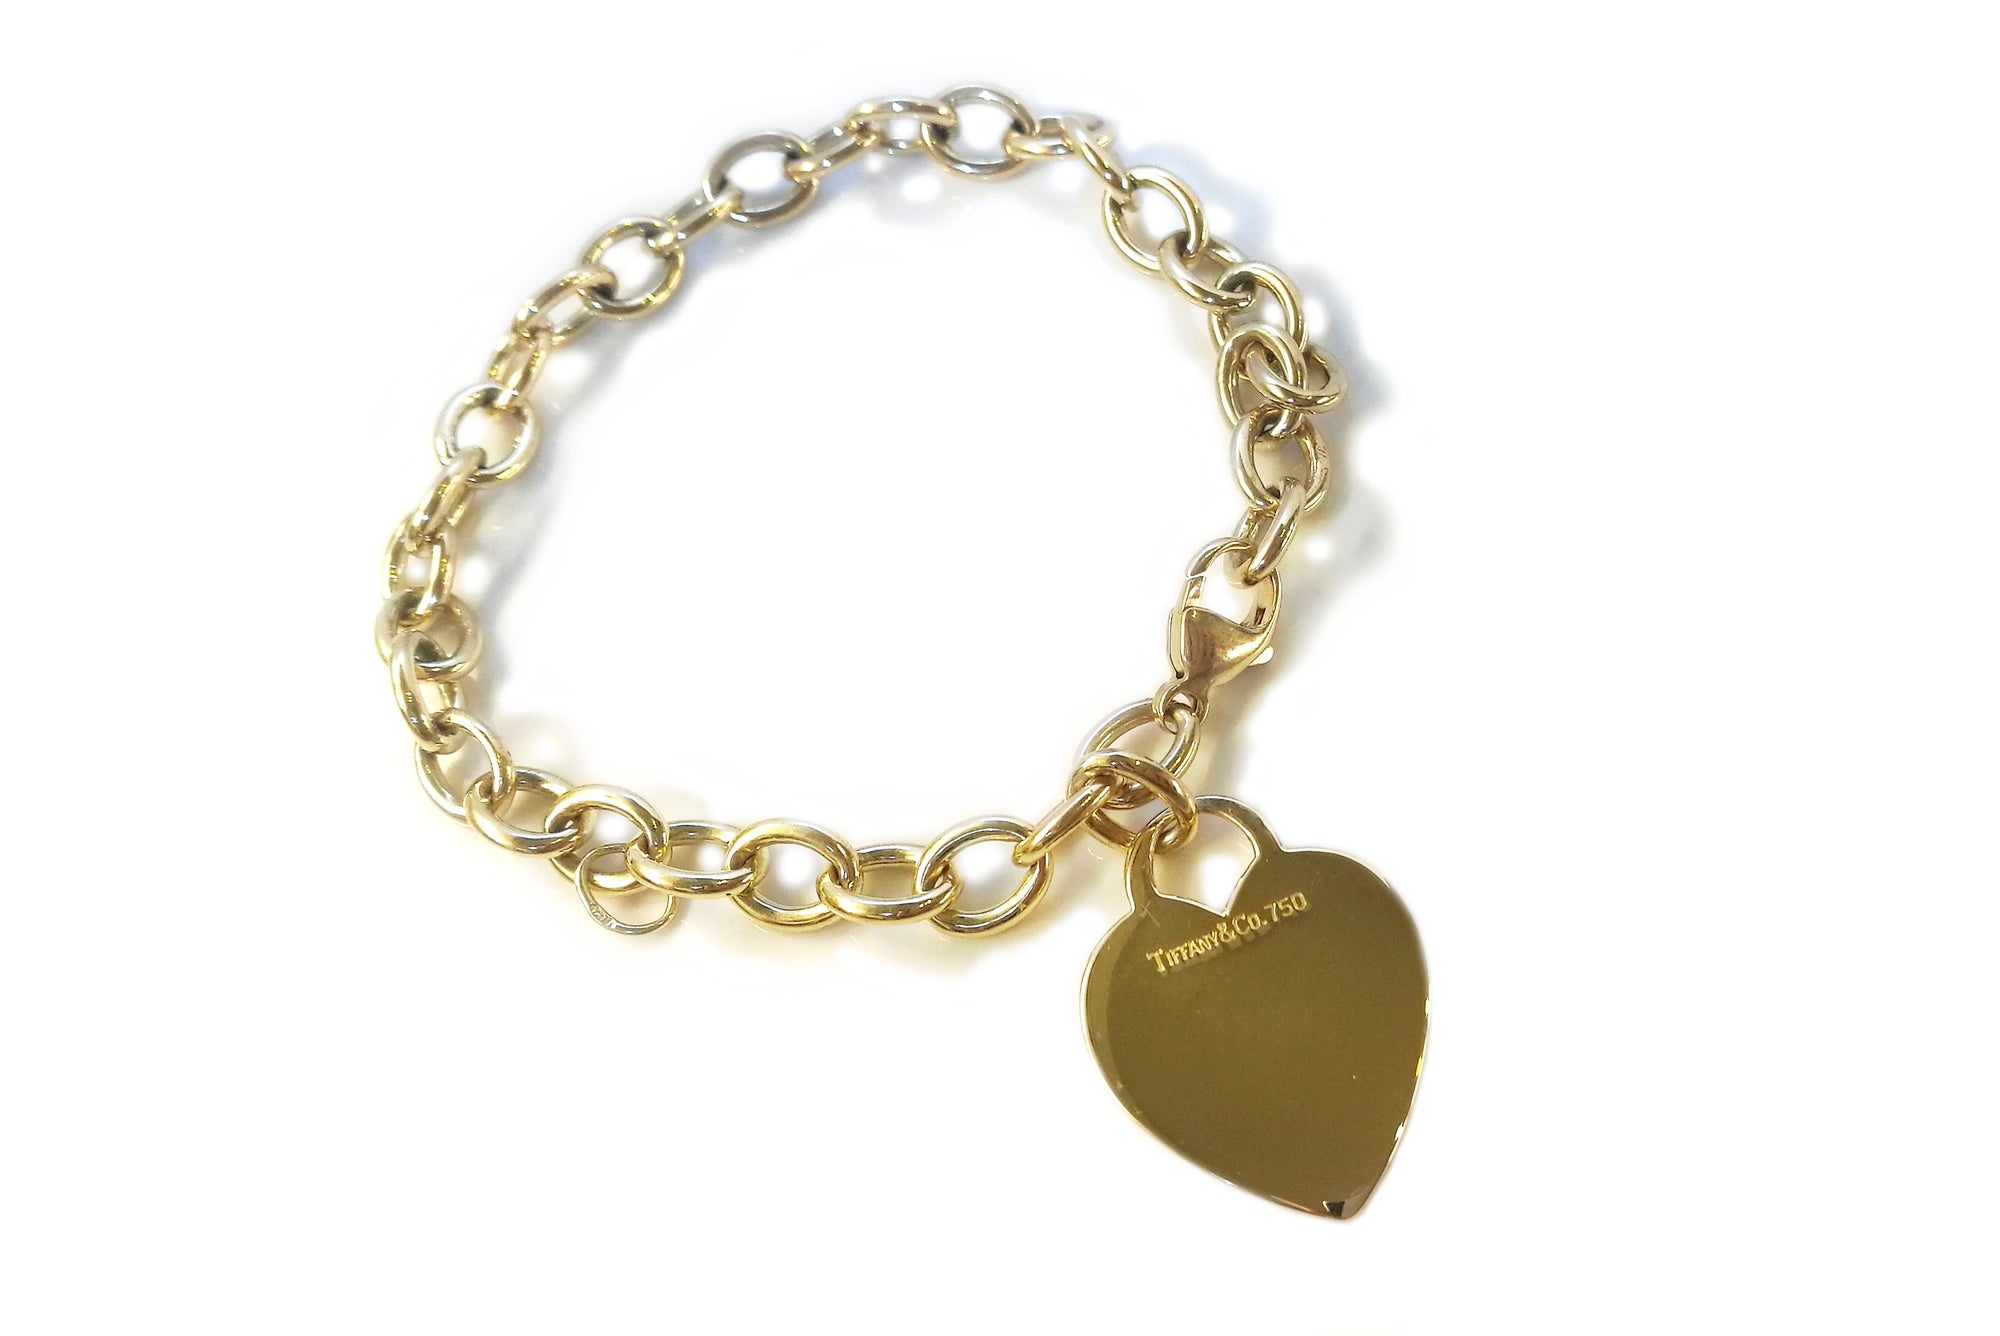 Tiffany & Co. 18k Yellow Gold Heart Tag Link Bracelet, 8 inches